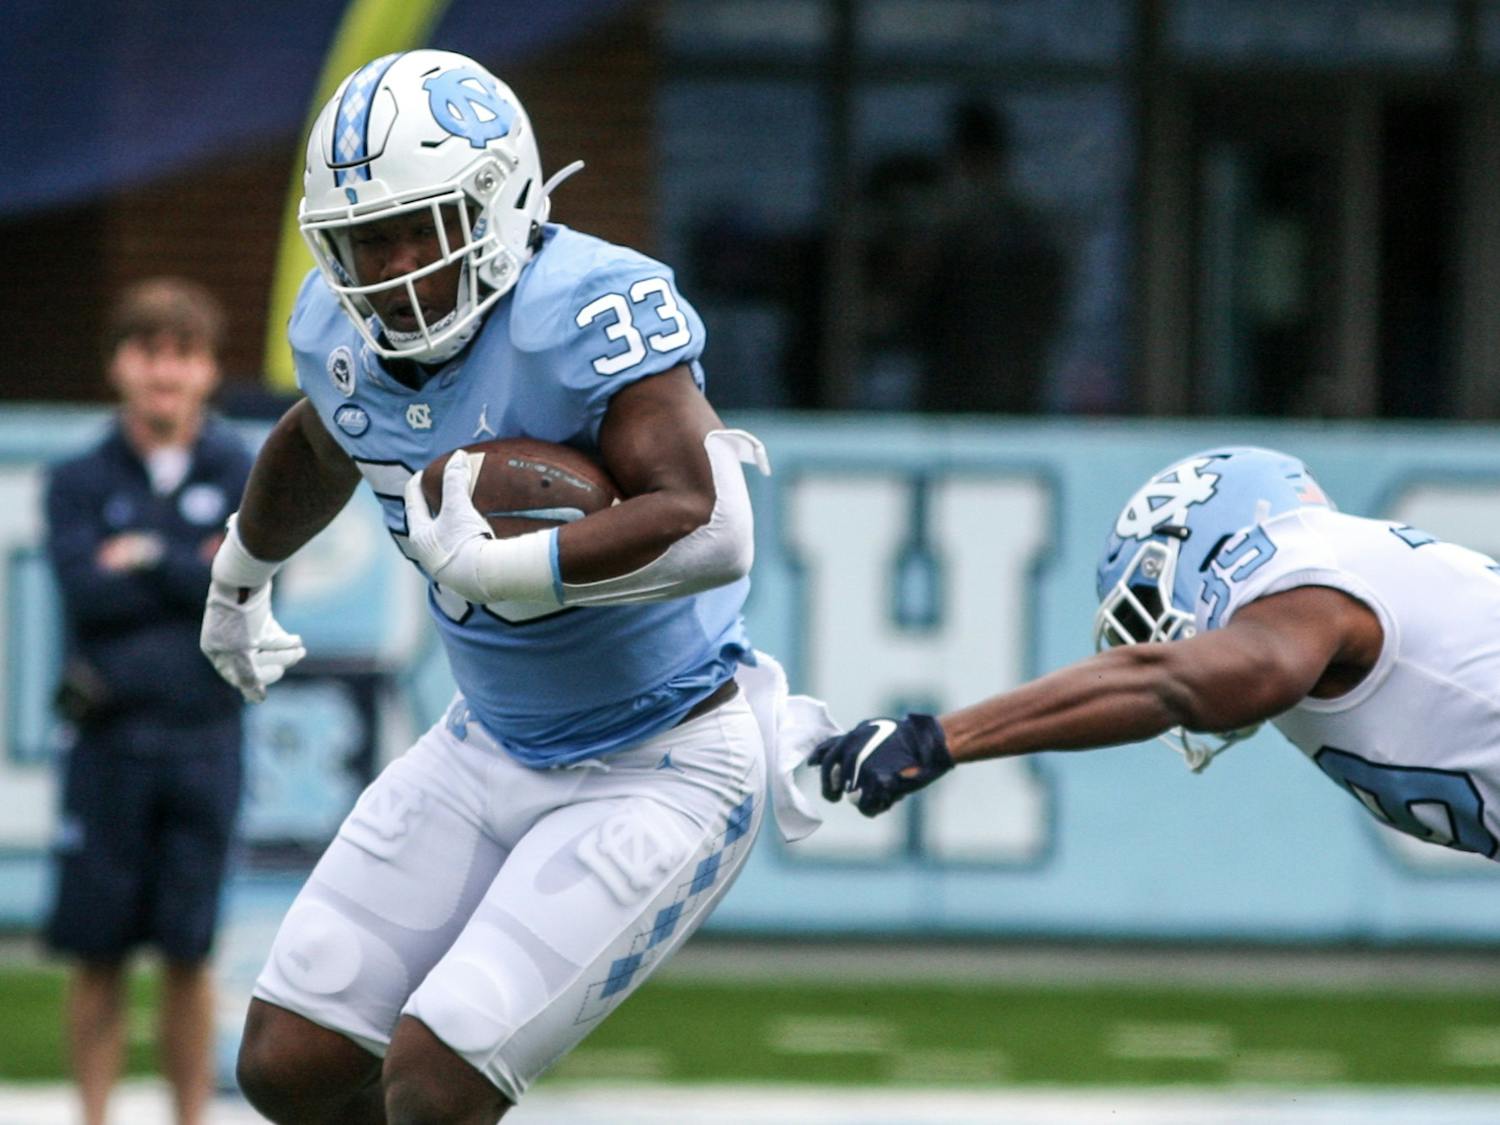 Redshirt freshman running back Kamarro Edmonds protects the ball in the Spring Game on Saturday, April 9, 2022. The Tar Heels and Carolina tied, 14-14.